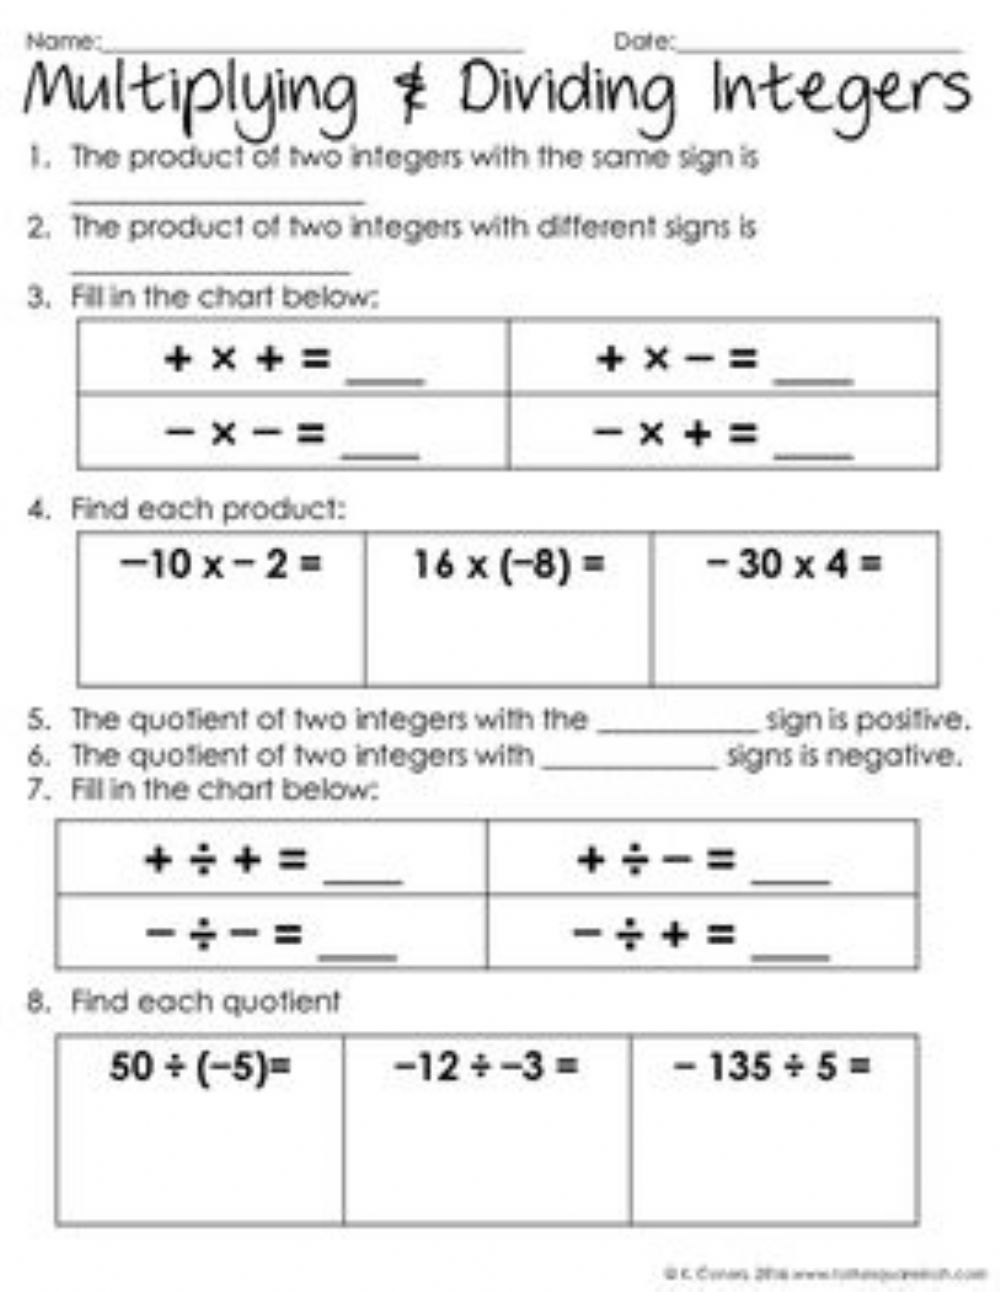 Mathematics 6 Multiplication And Division Of Integers Worksheet